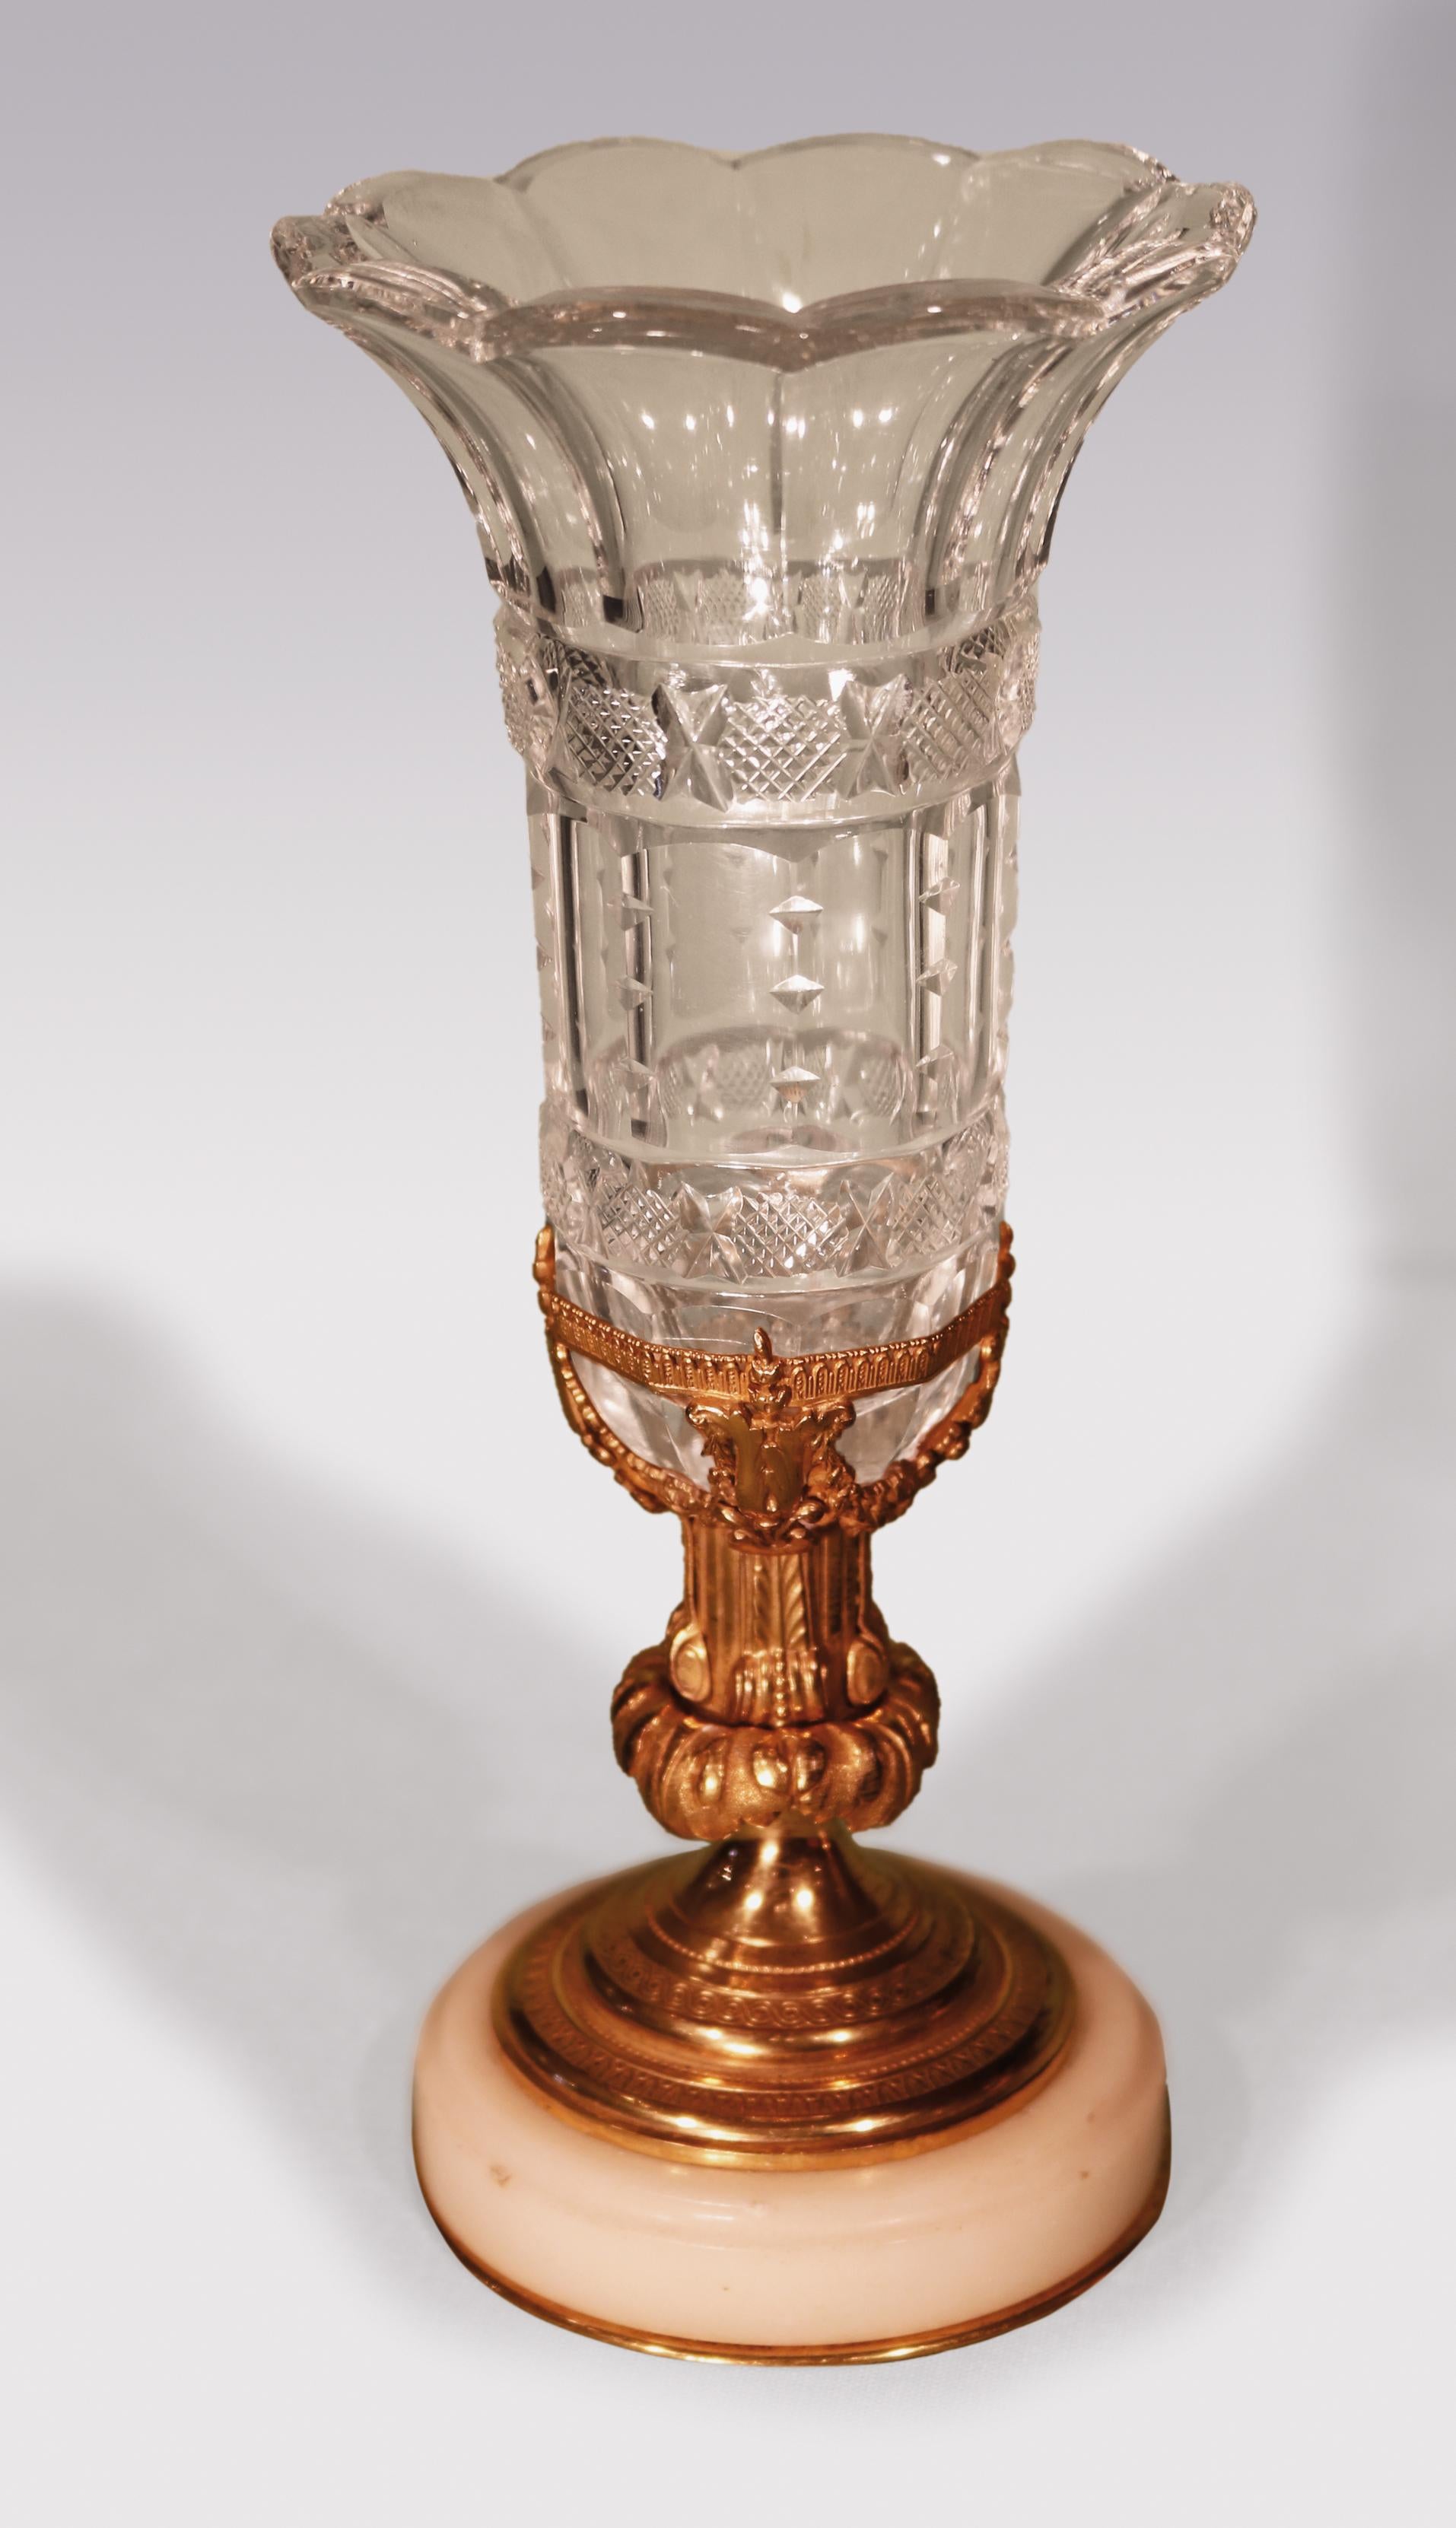 An unusual pair of mid-19th century cut-glass crystal vases having facetted borders and flared rims contained in intricately pierced ormolu holders, supported on acanthus and scroll stems ending on circular engine turned bases with white marble